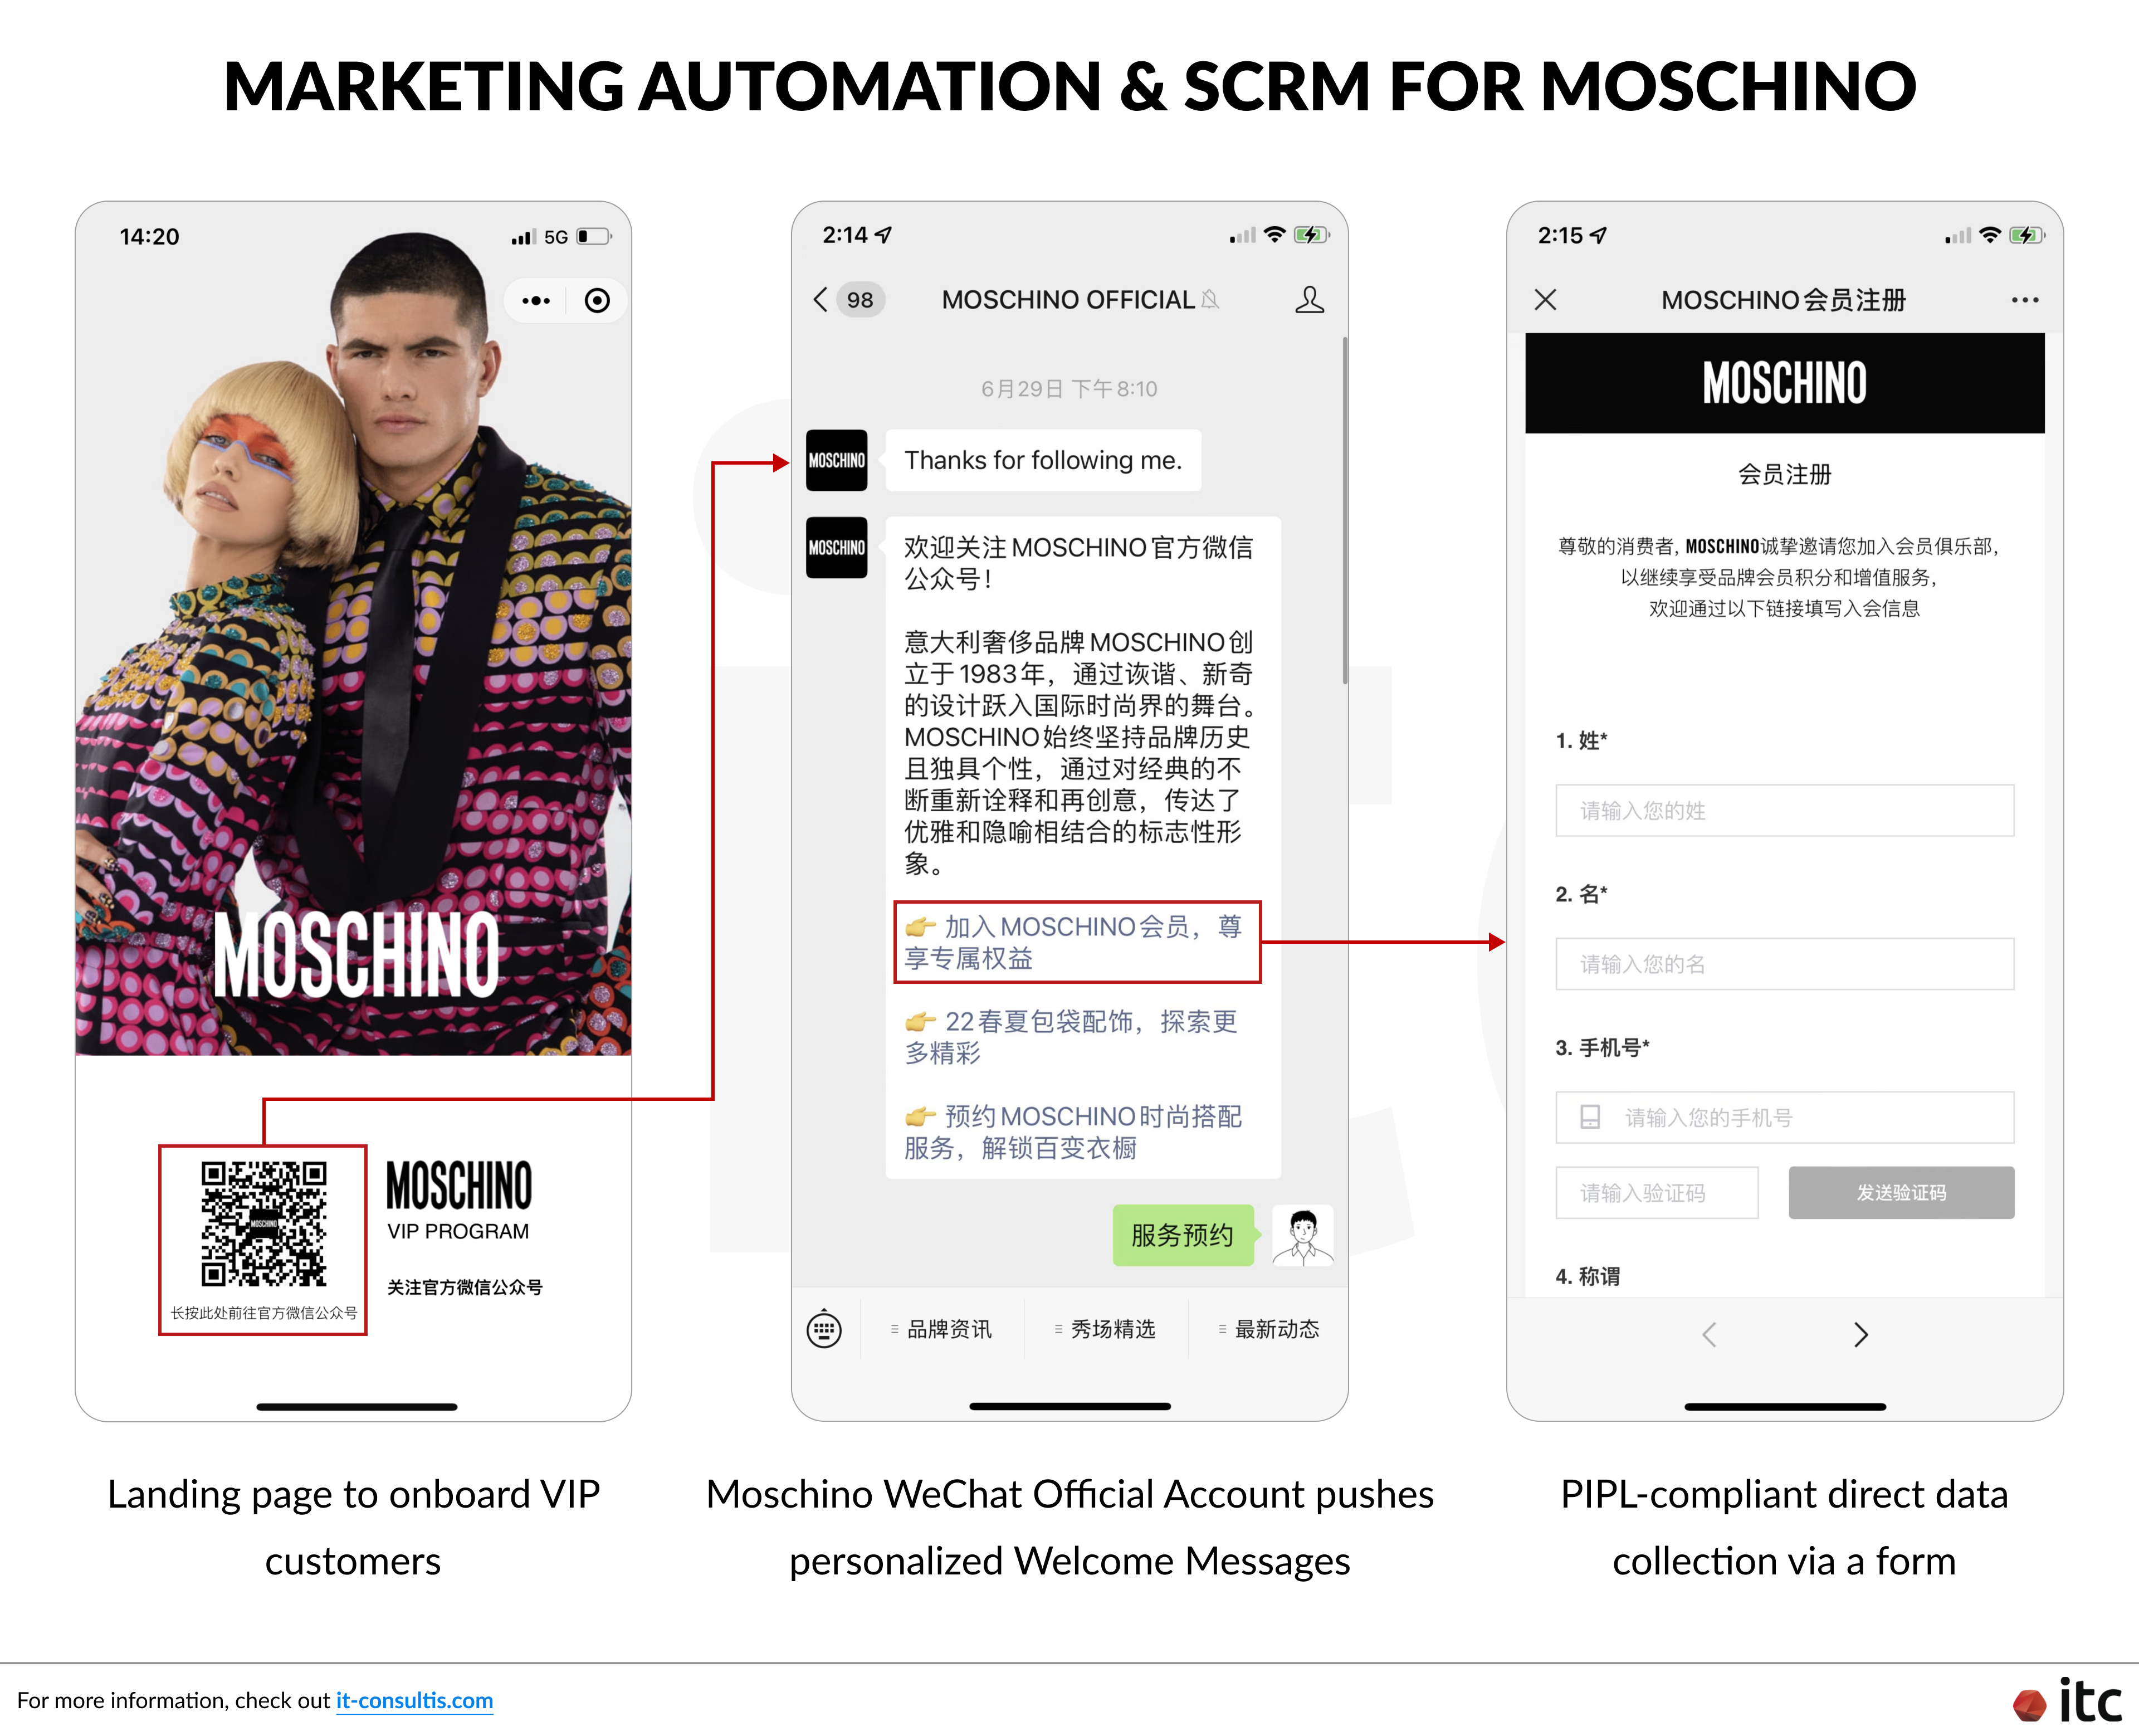 Marketing Automation and Social CRM for Moschino's WeChat Official Account and consolidate all scattered digital data assets